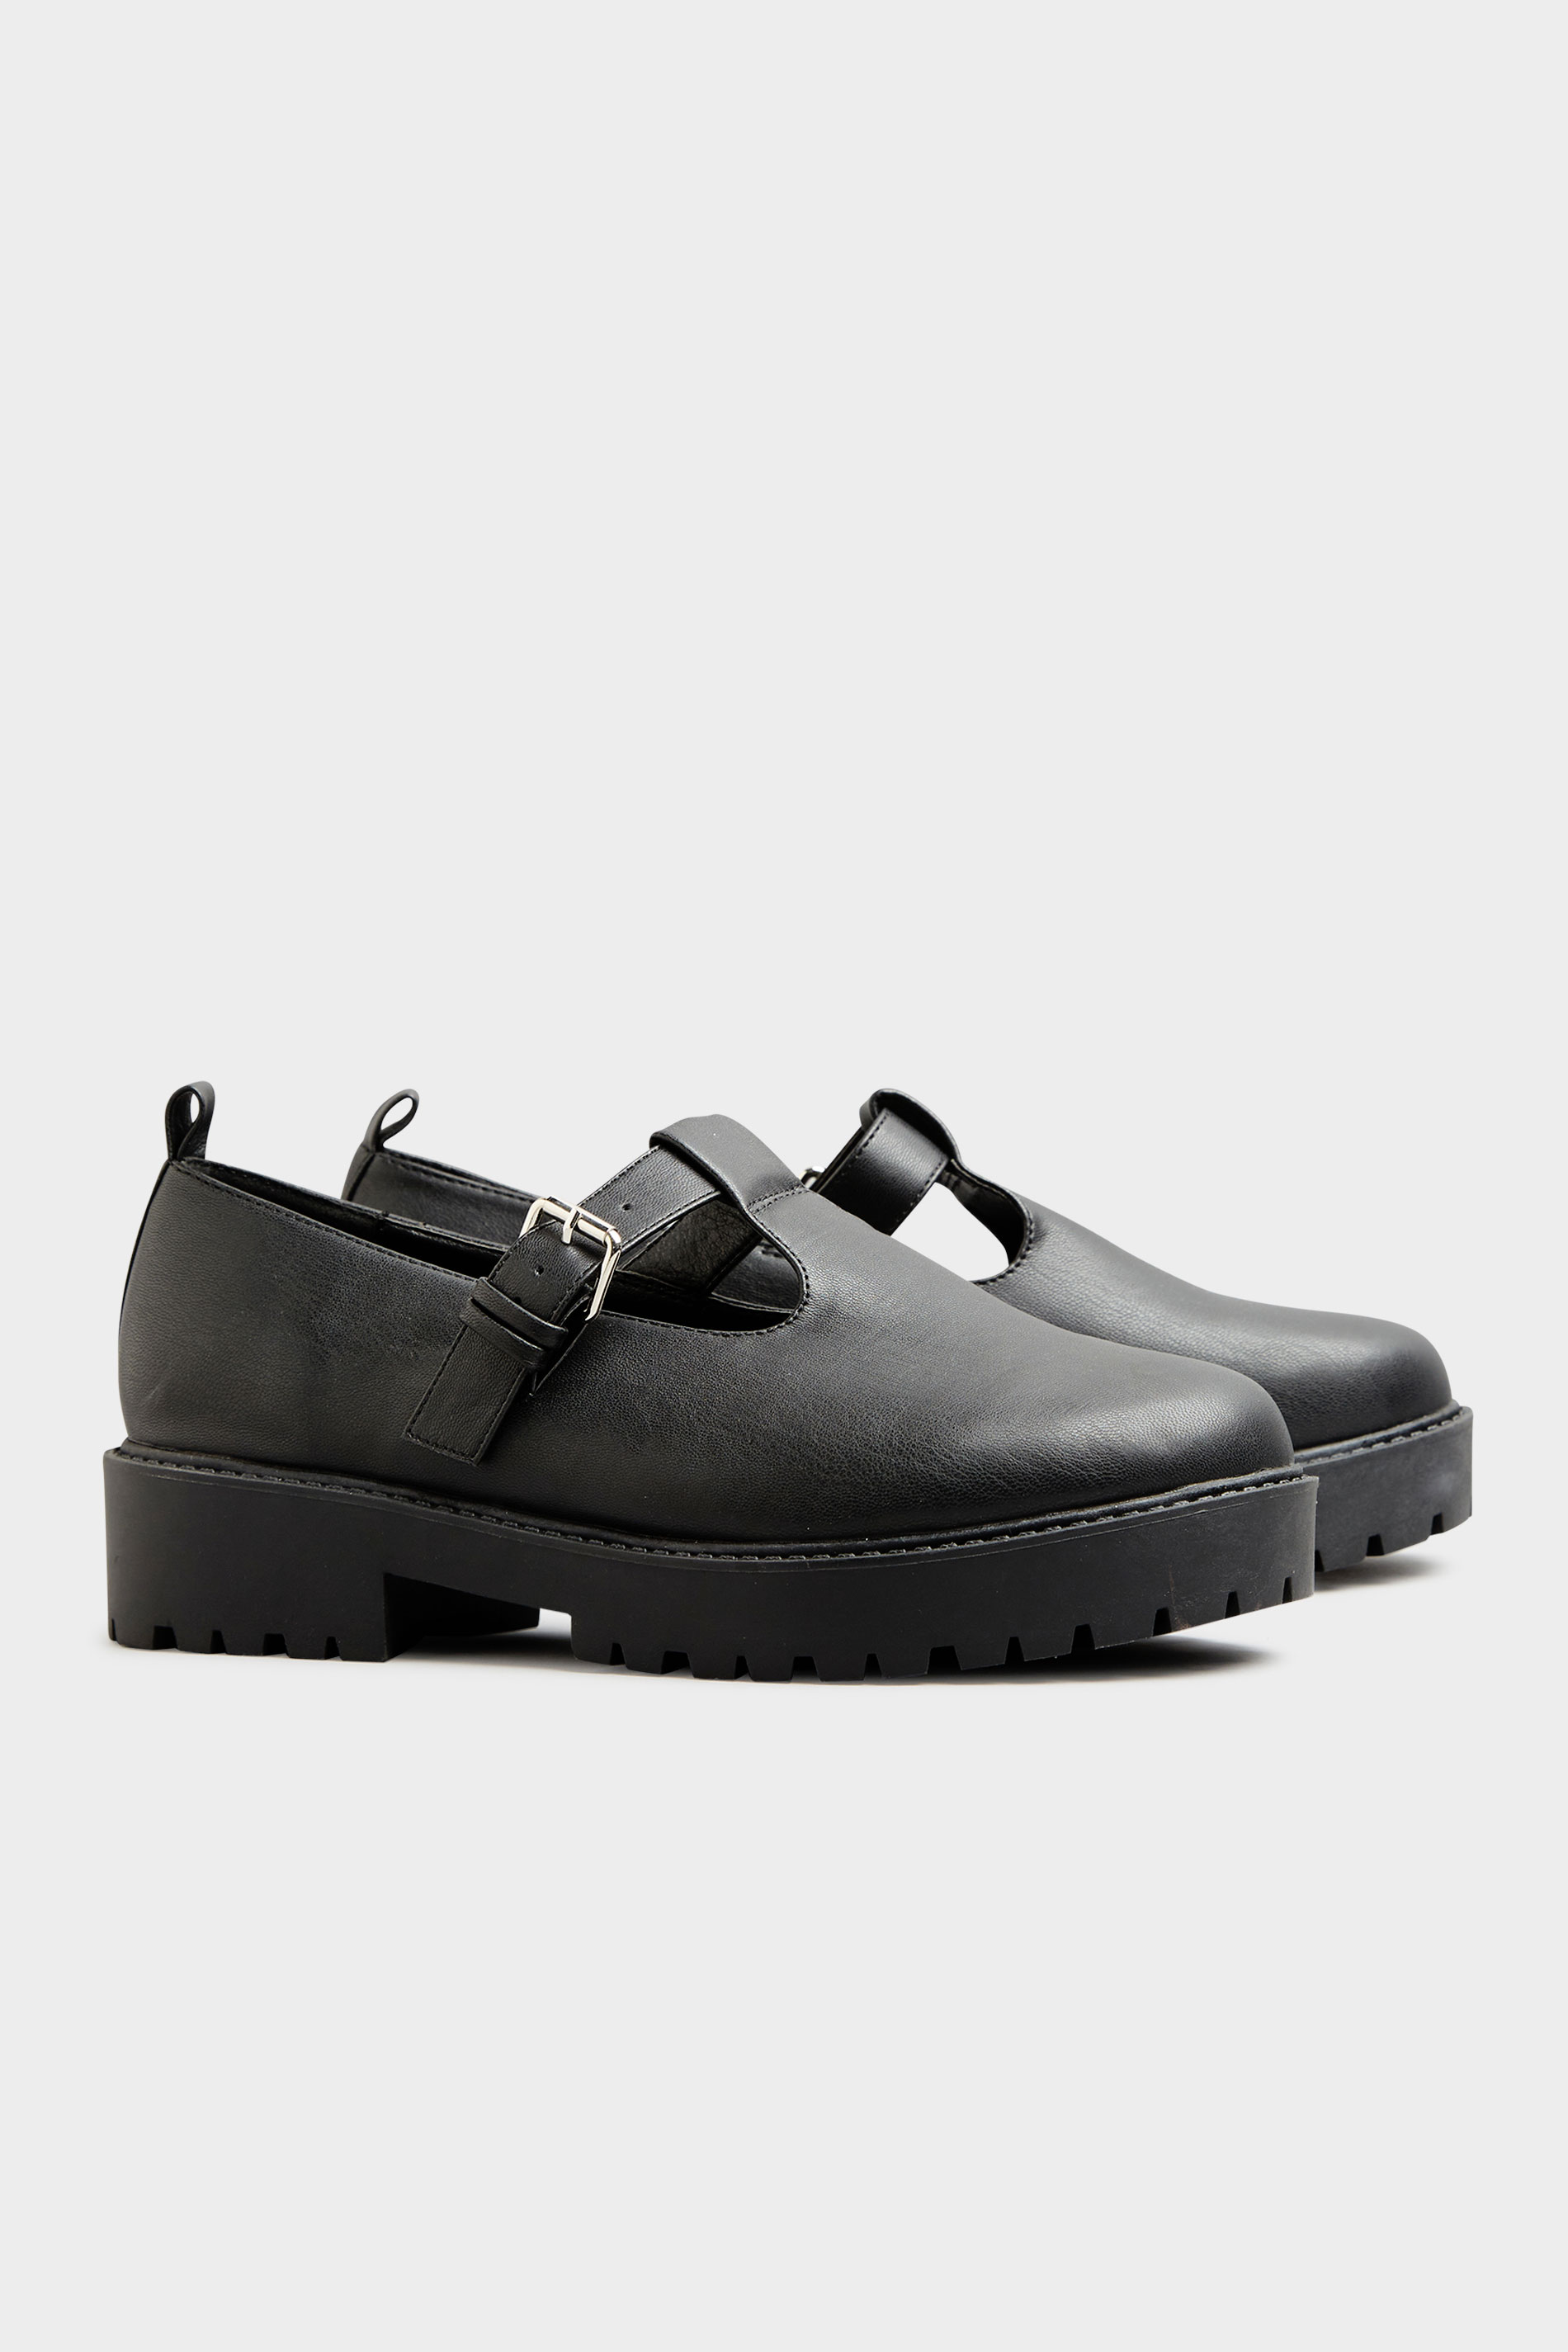 LIMITED COLLECTION Black Mary Janes In Extra Wide Fit_C.jpg